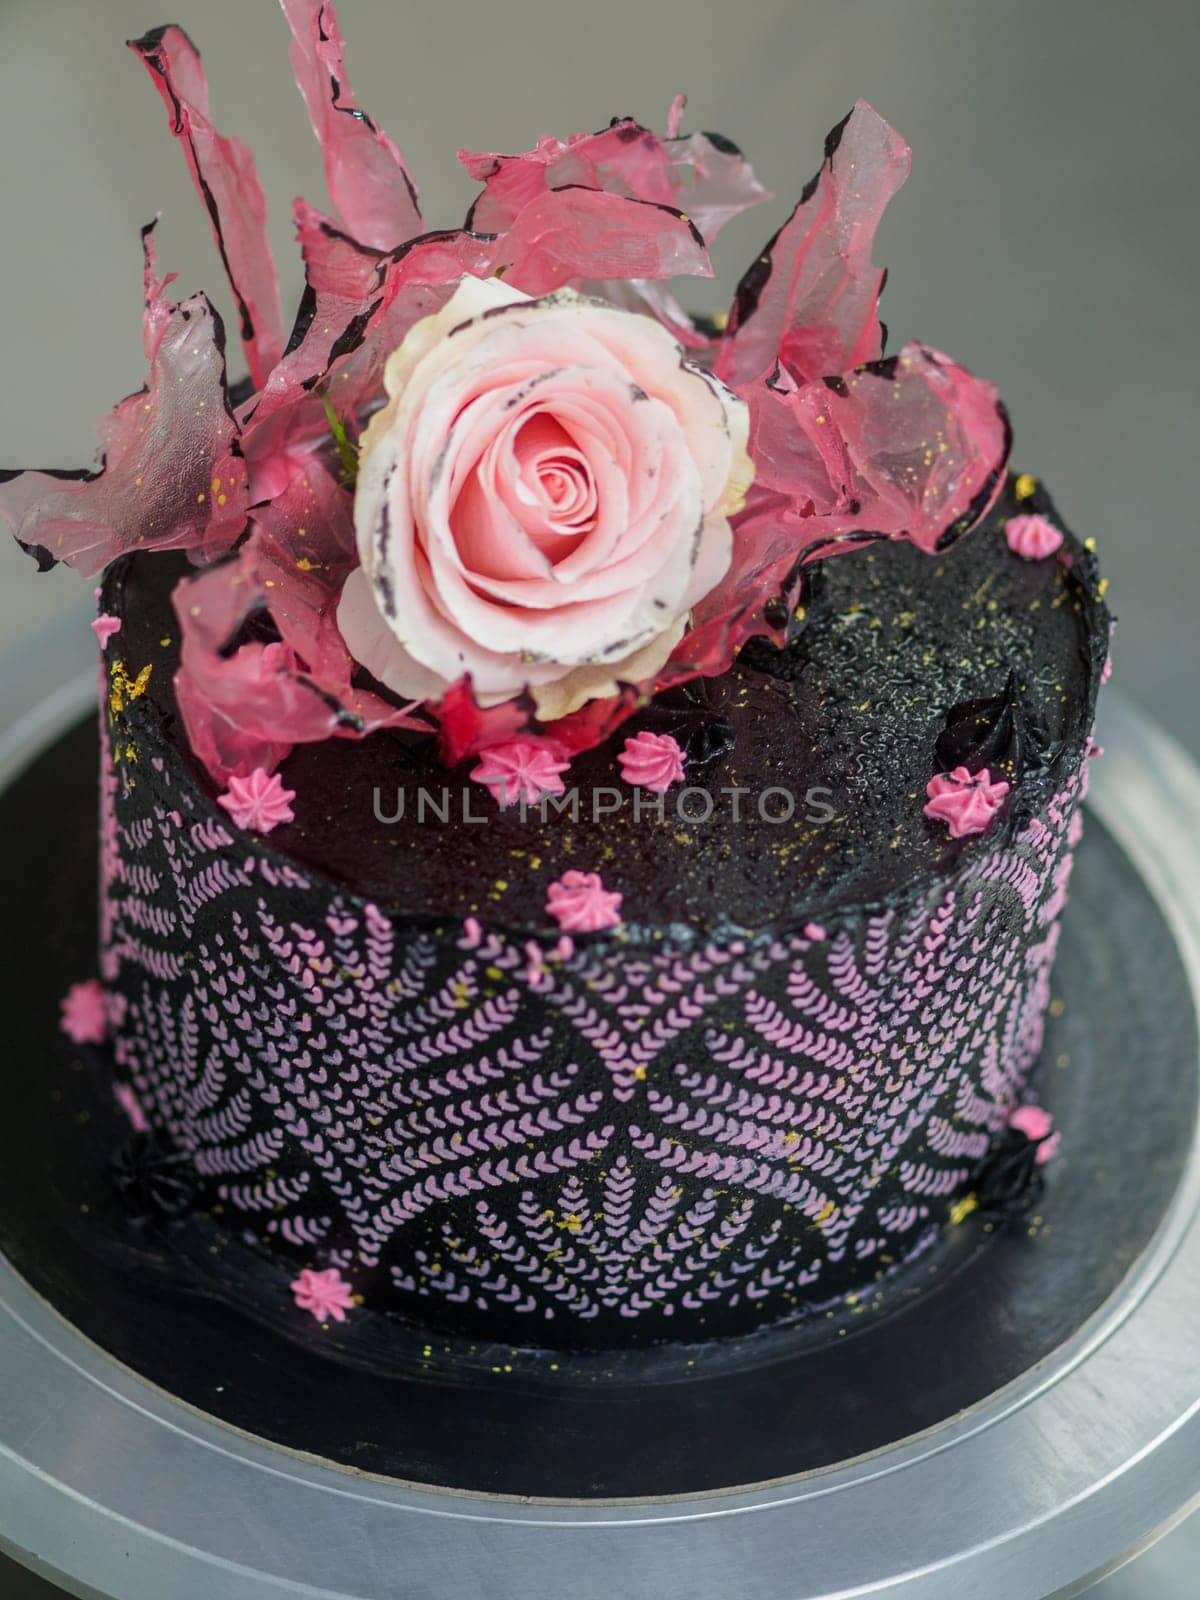 frosted icing black decorate cake for birthday celebration, real rose topping and pink sweet swirls in professional kitchen